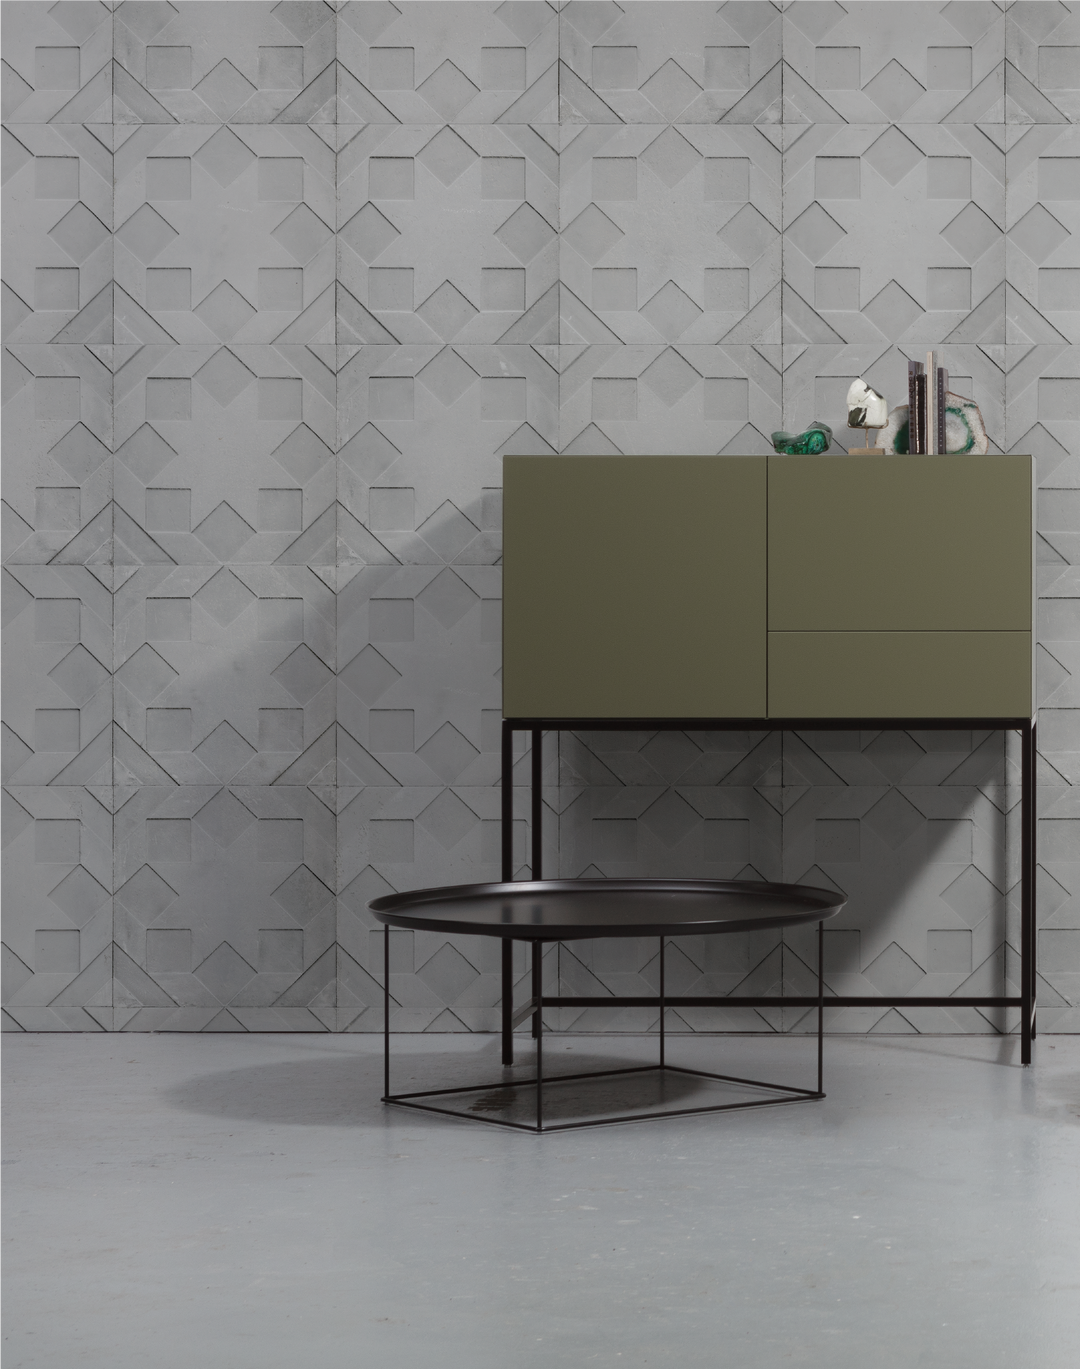 NDE-02 Moulded Star Wallpaper By Nada Debs